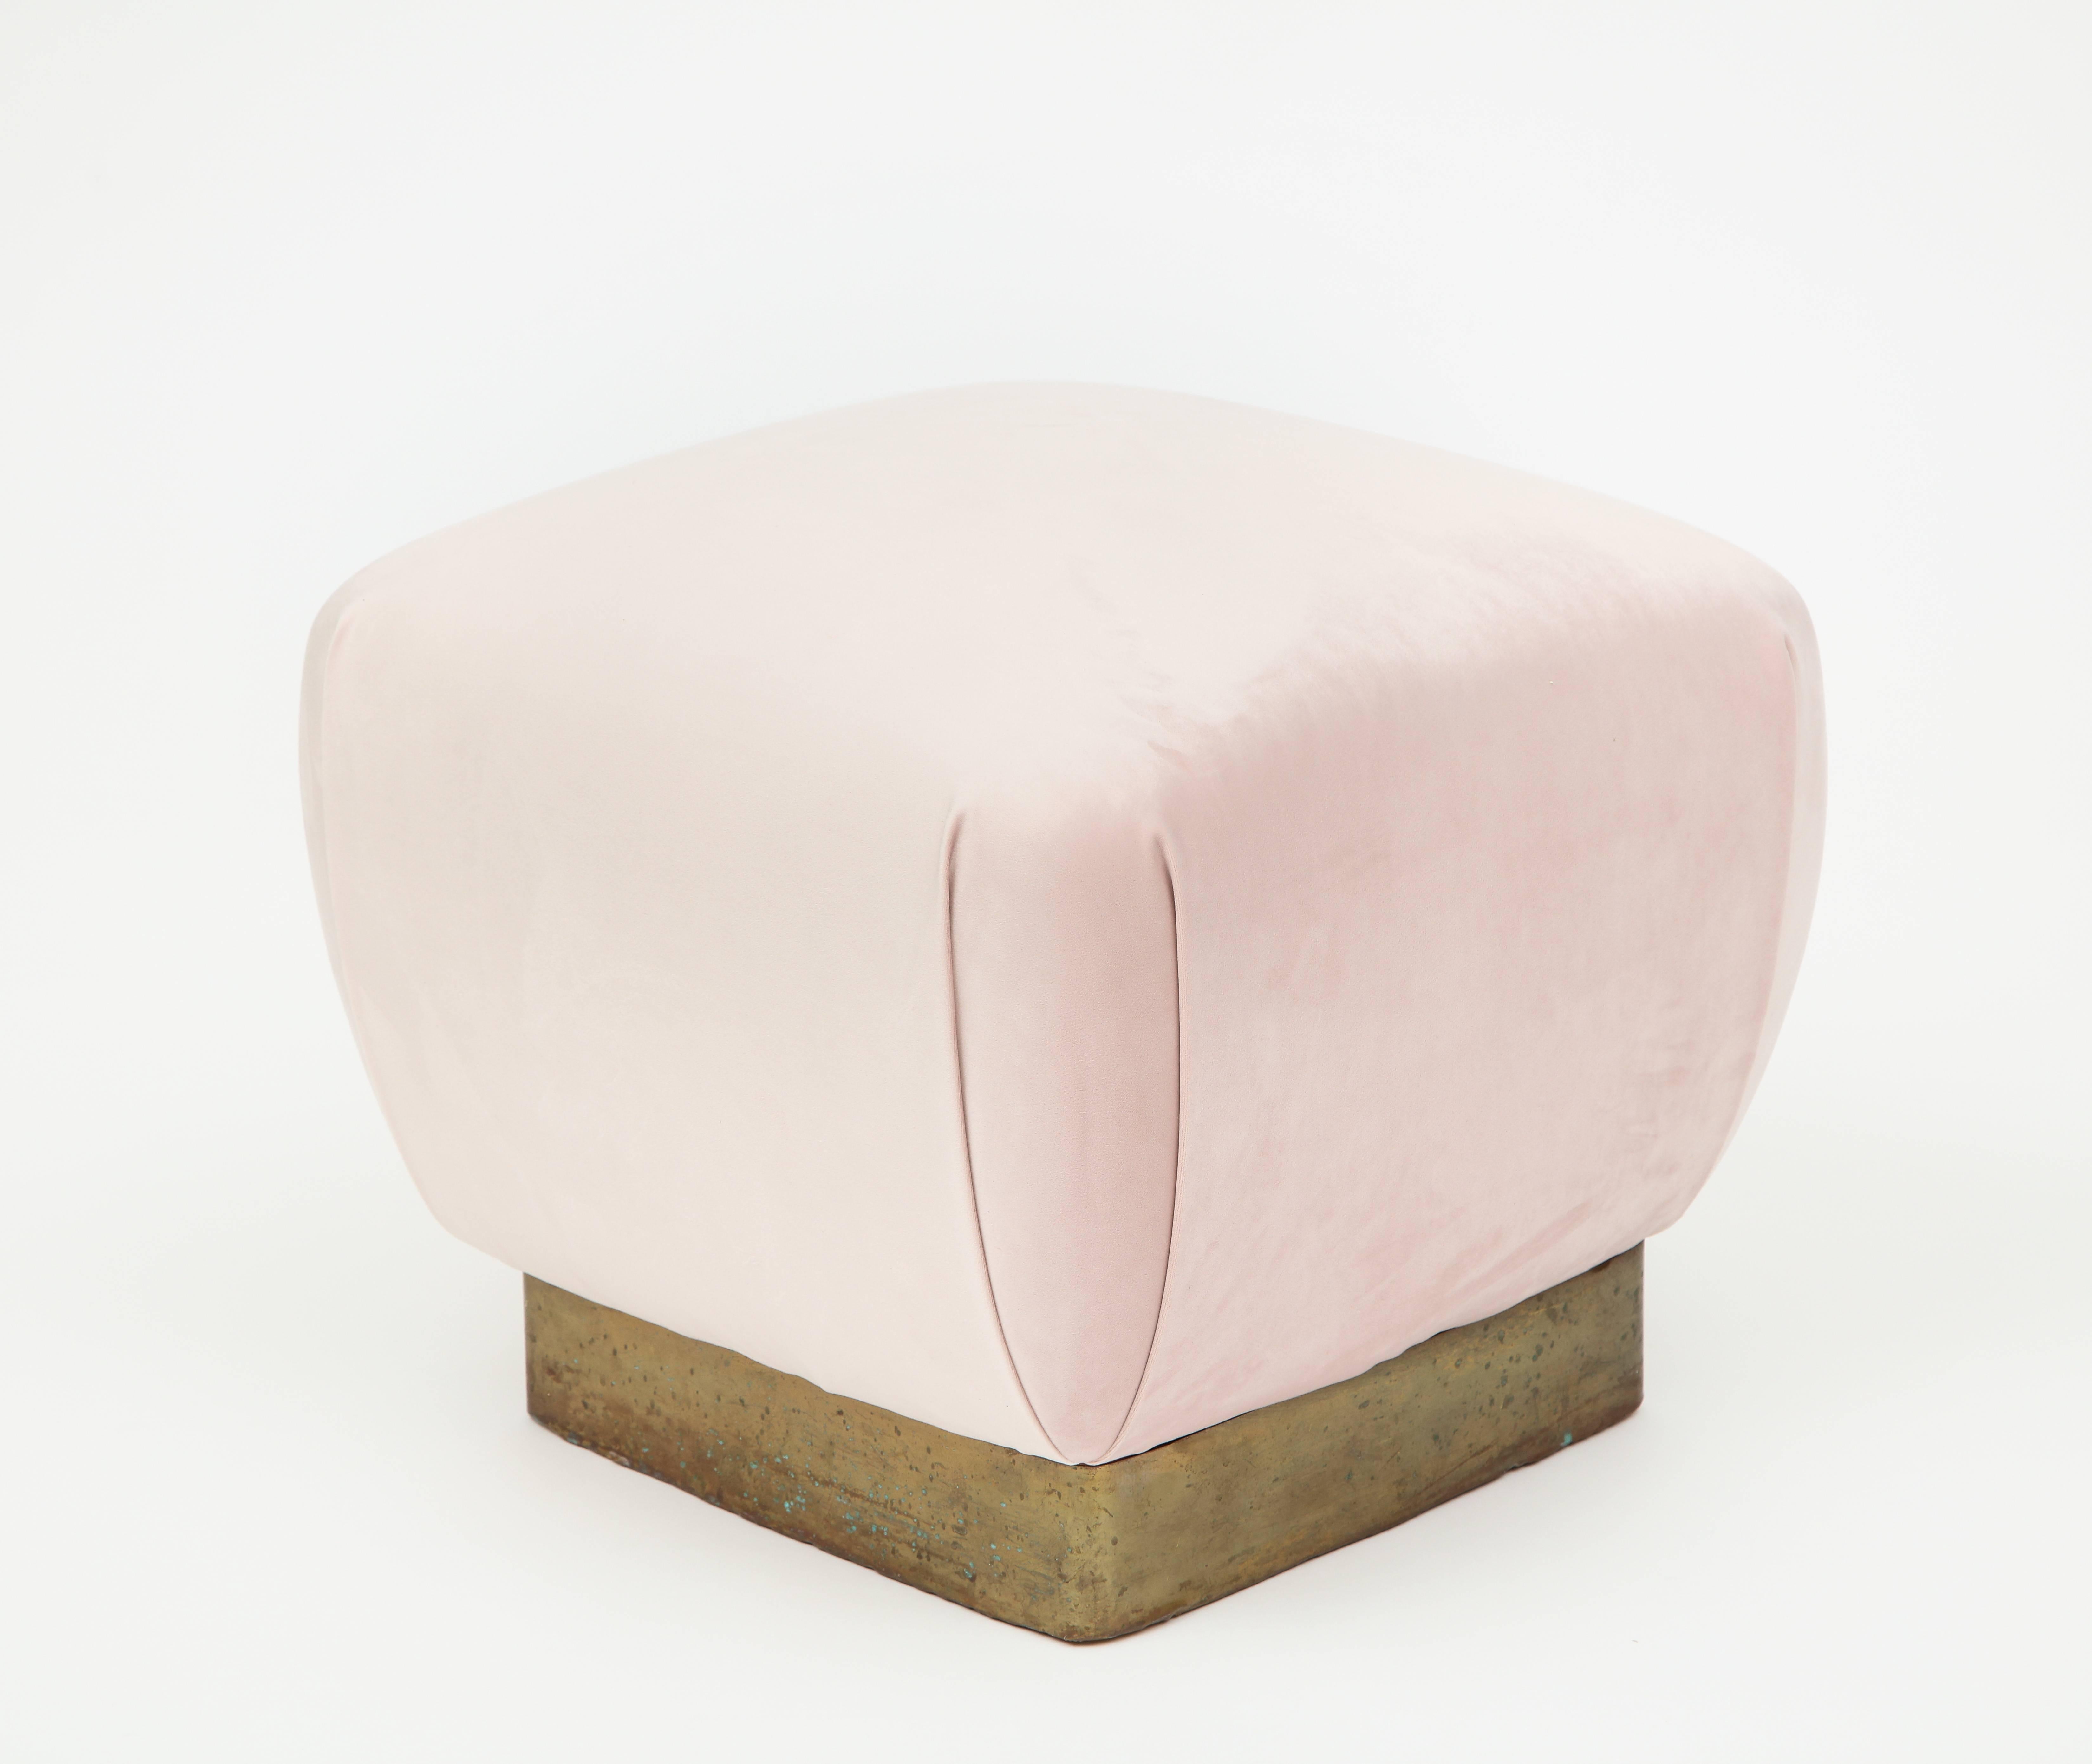 Pair of brass and pink pouf's ottoman's, 1970s.
Karl Springer attributed
Awesome pair of pink pouf's. 
Brass bases with patina on the brass. 
Perfect size and style.